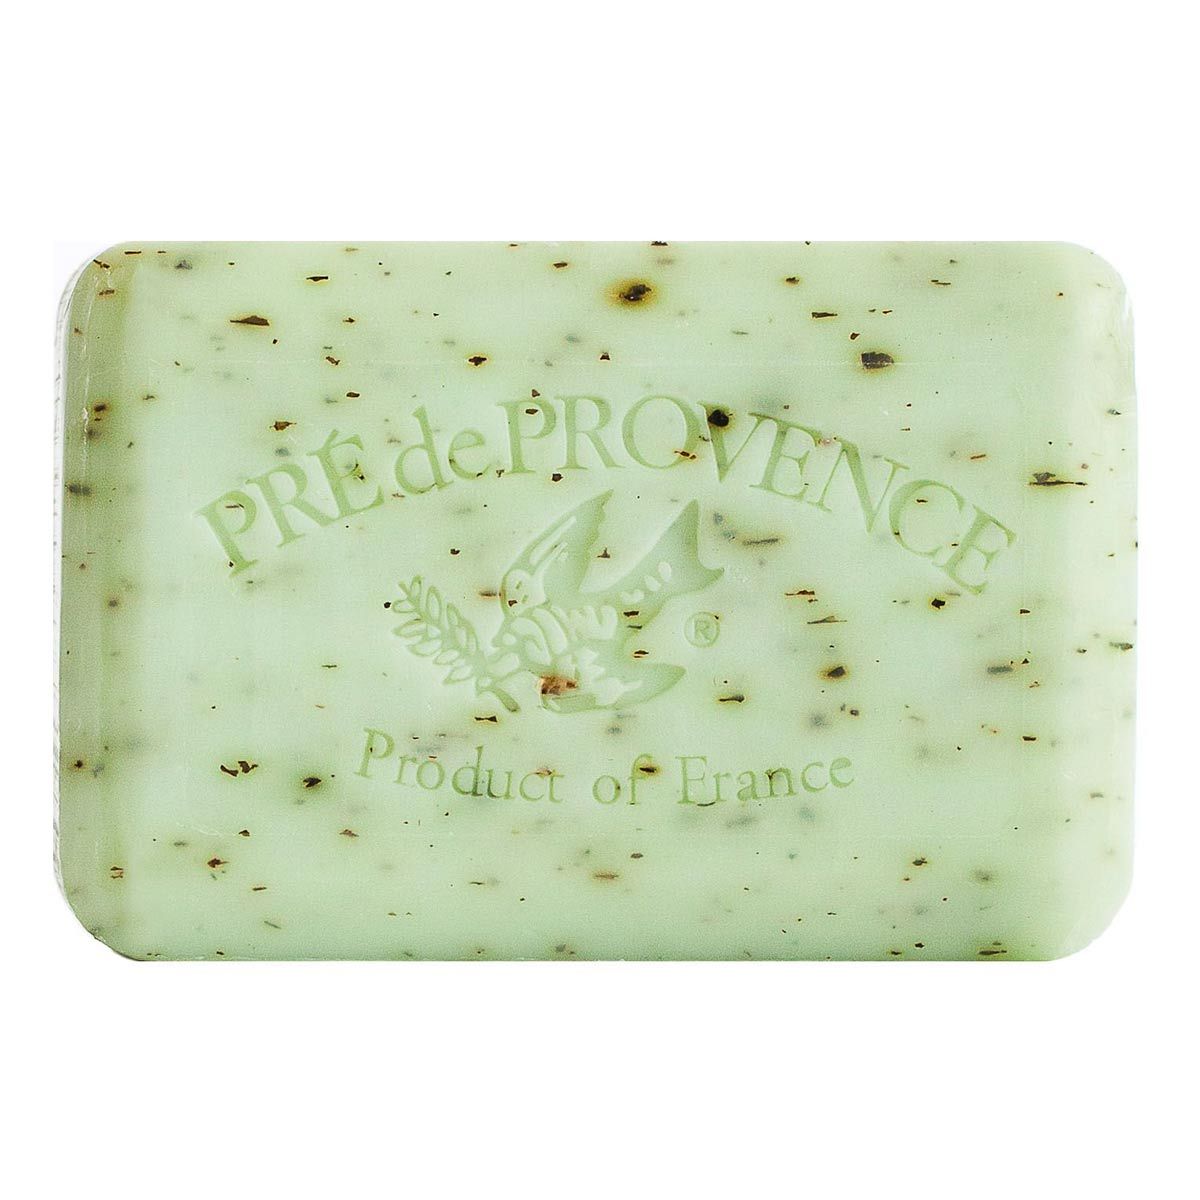 Primary image of Rosemary Mint Soap